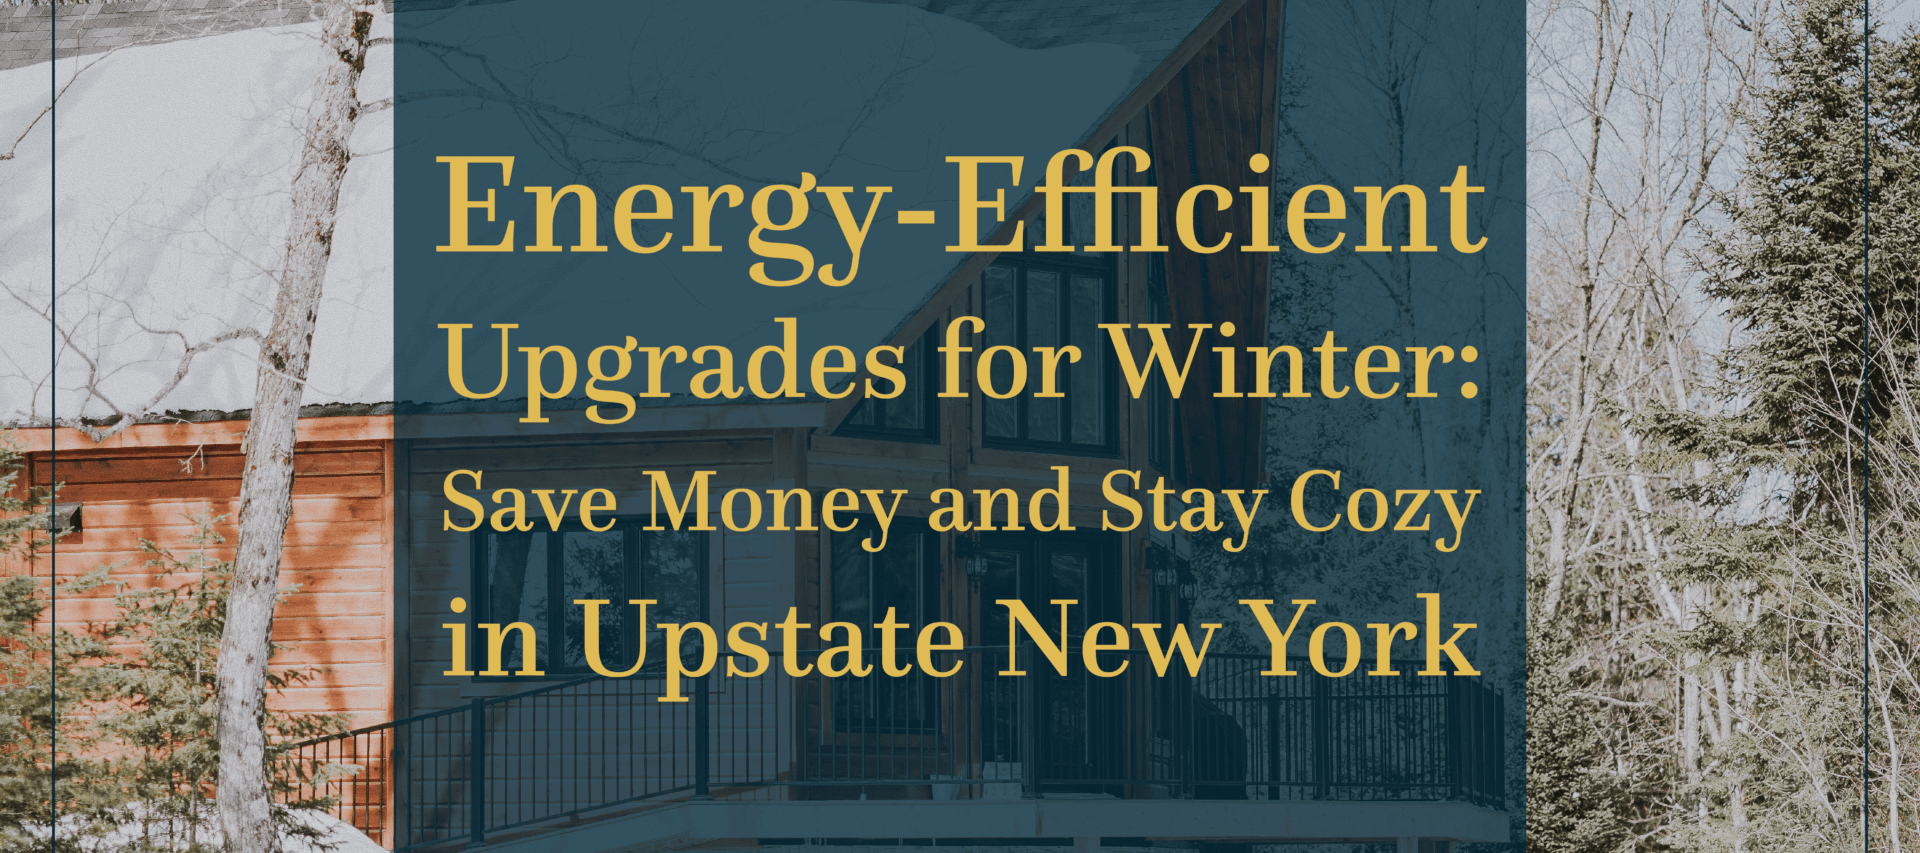 Energy-Efficient Upgrades for Winter: Save Money and Stay Cozy in Upstate New York